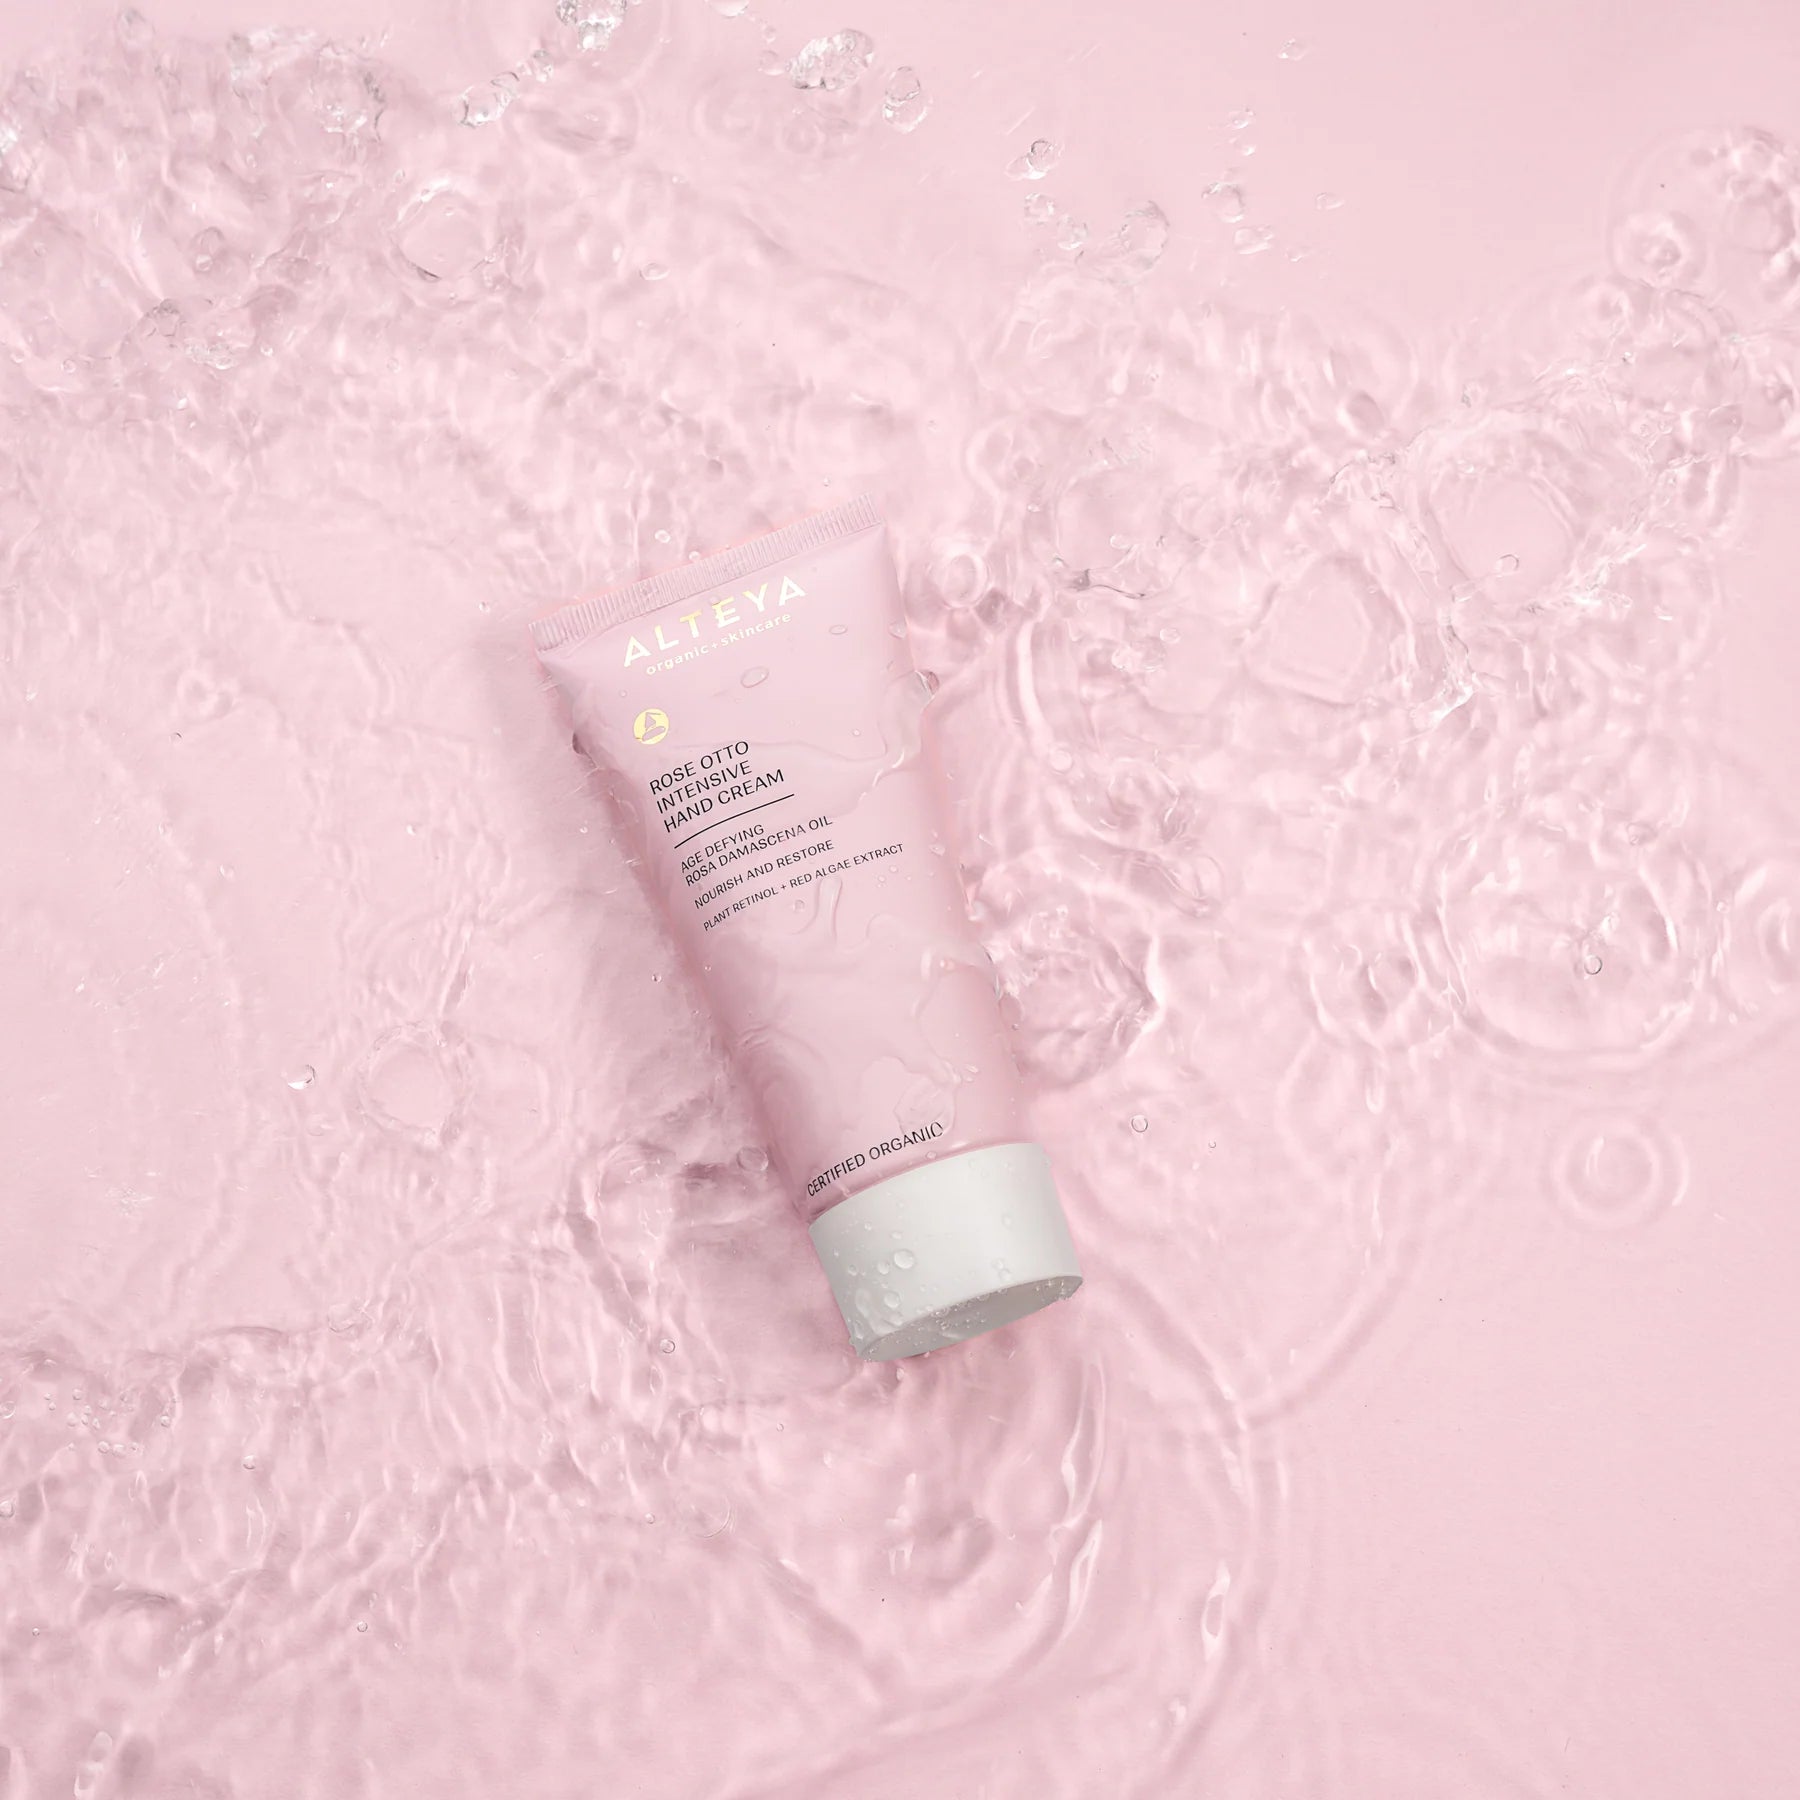 A tube of Organic Rose Otto Intensive Hand Cream on a pink background.